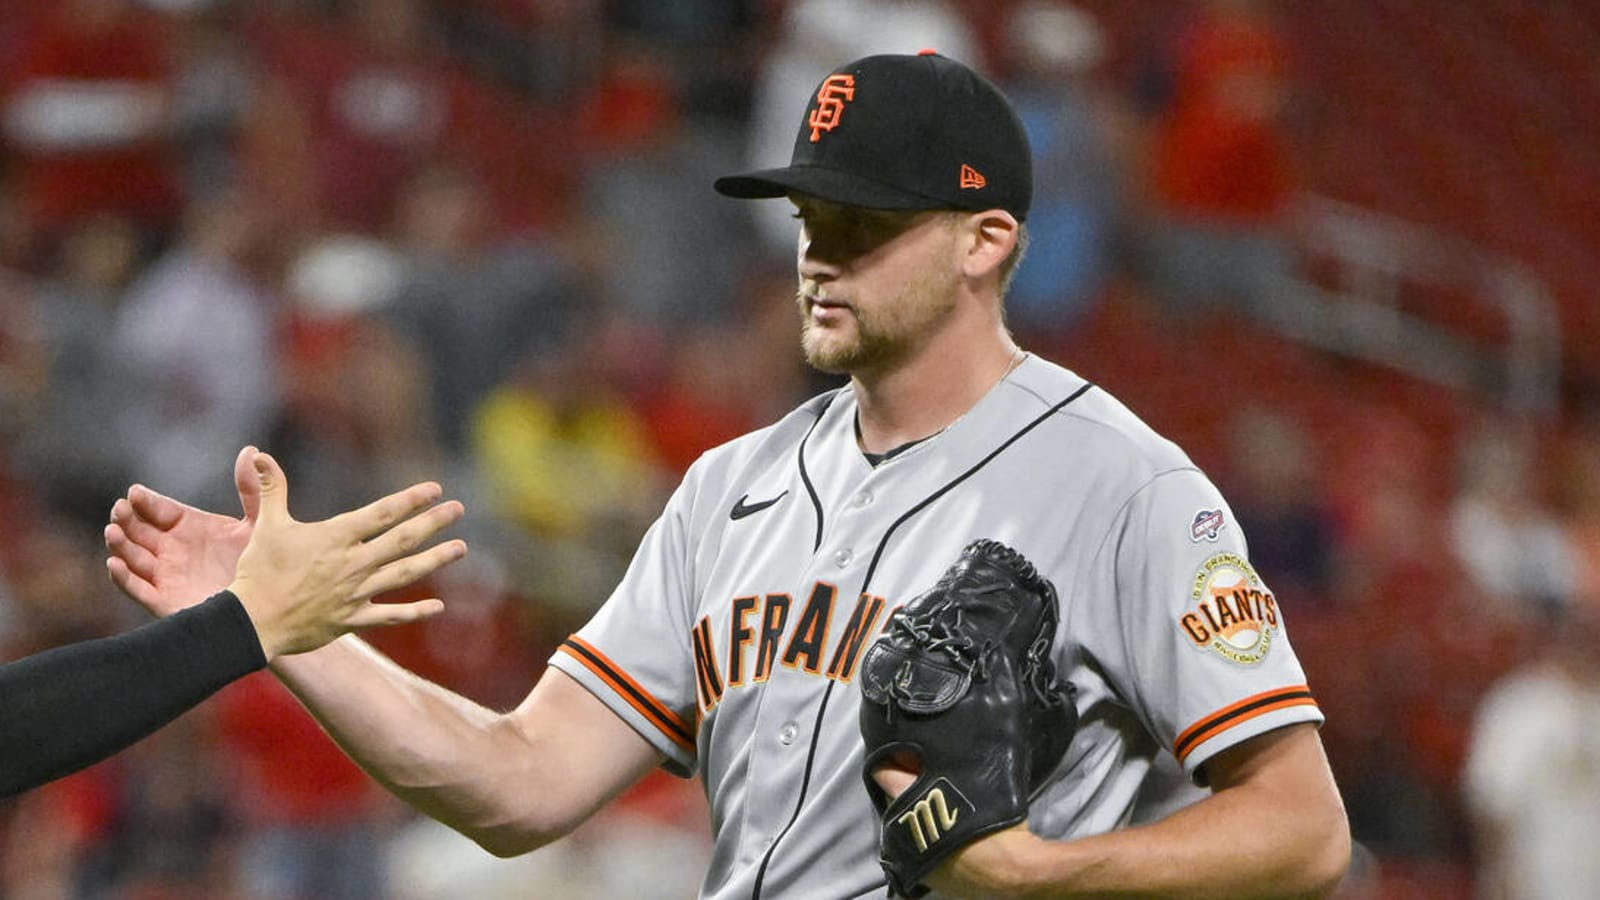 Giants pitcher earns save in first time at MLB stadium